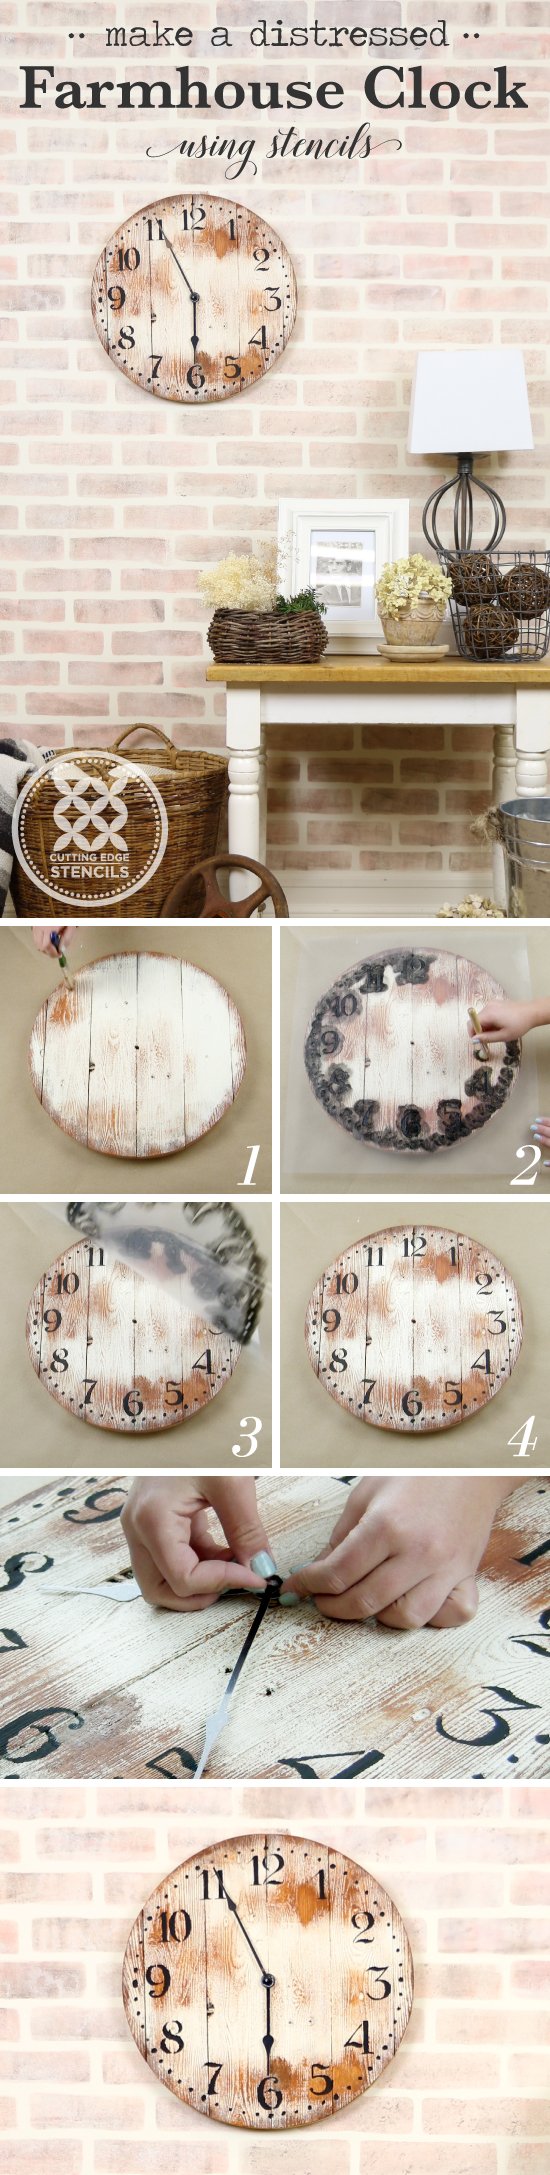 Cutting Edge Stencils shares a craft tutorial on how to make a distressed farmhouse clock using the Old Farm Clock Wall Stencil. http://www.cuttingedgestencils.com/old-farm-clock-stencil-farmhouse-clock-design.html